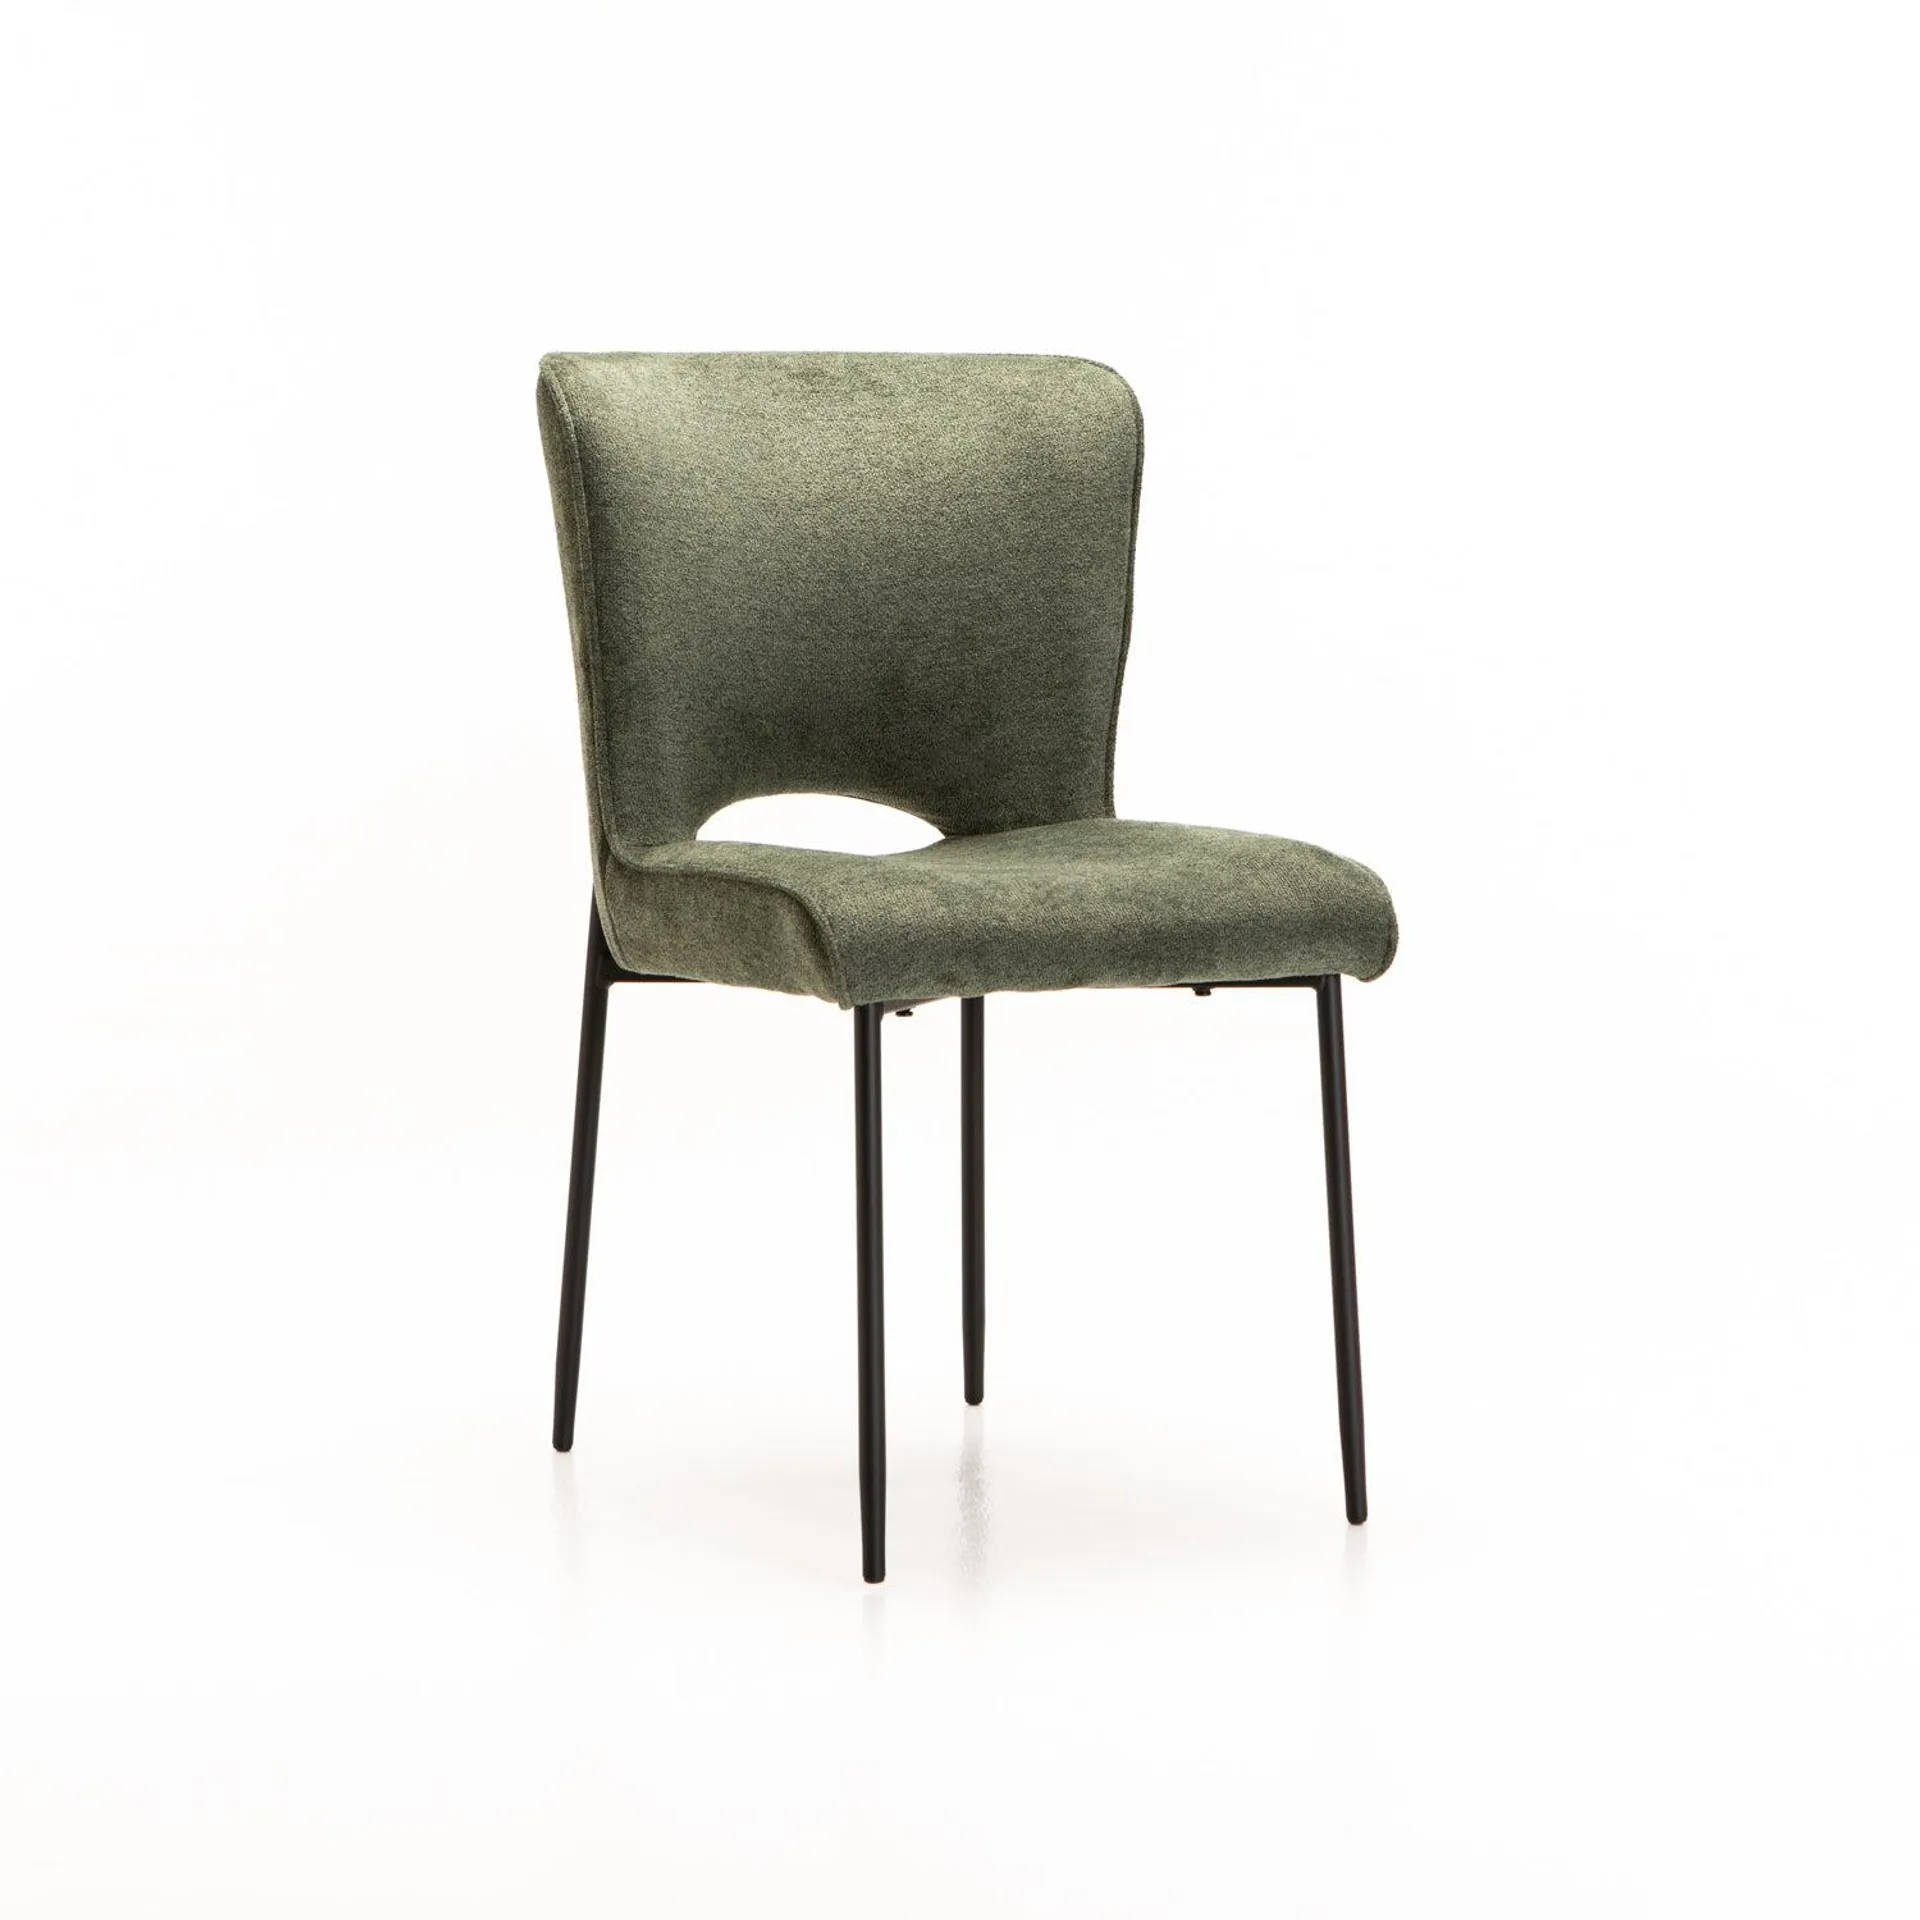 MODENA FABRIC DINING CHAIR